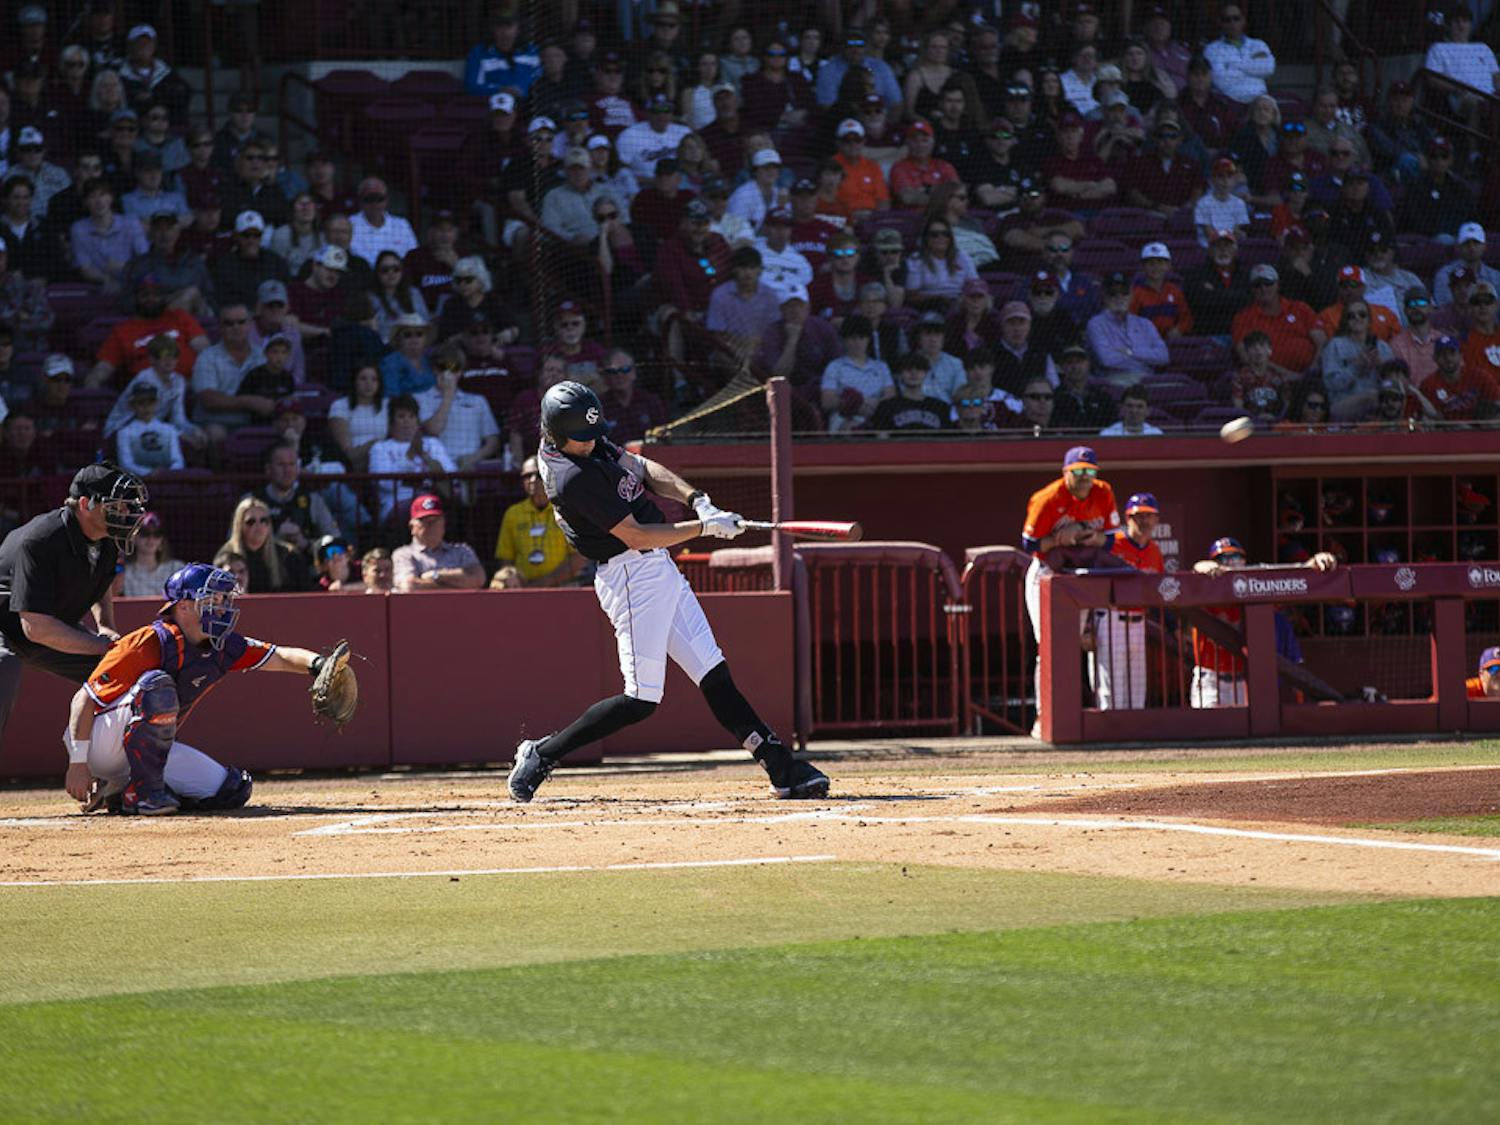 Senior infielder Braylen Wimmer hits a double during the second inning of the game against Clemson at Founders Park on March 5, 2023. The Gamecocks beat the Tigers 7-1.